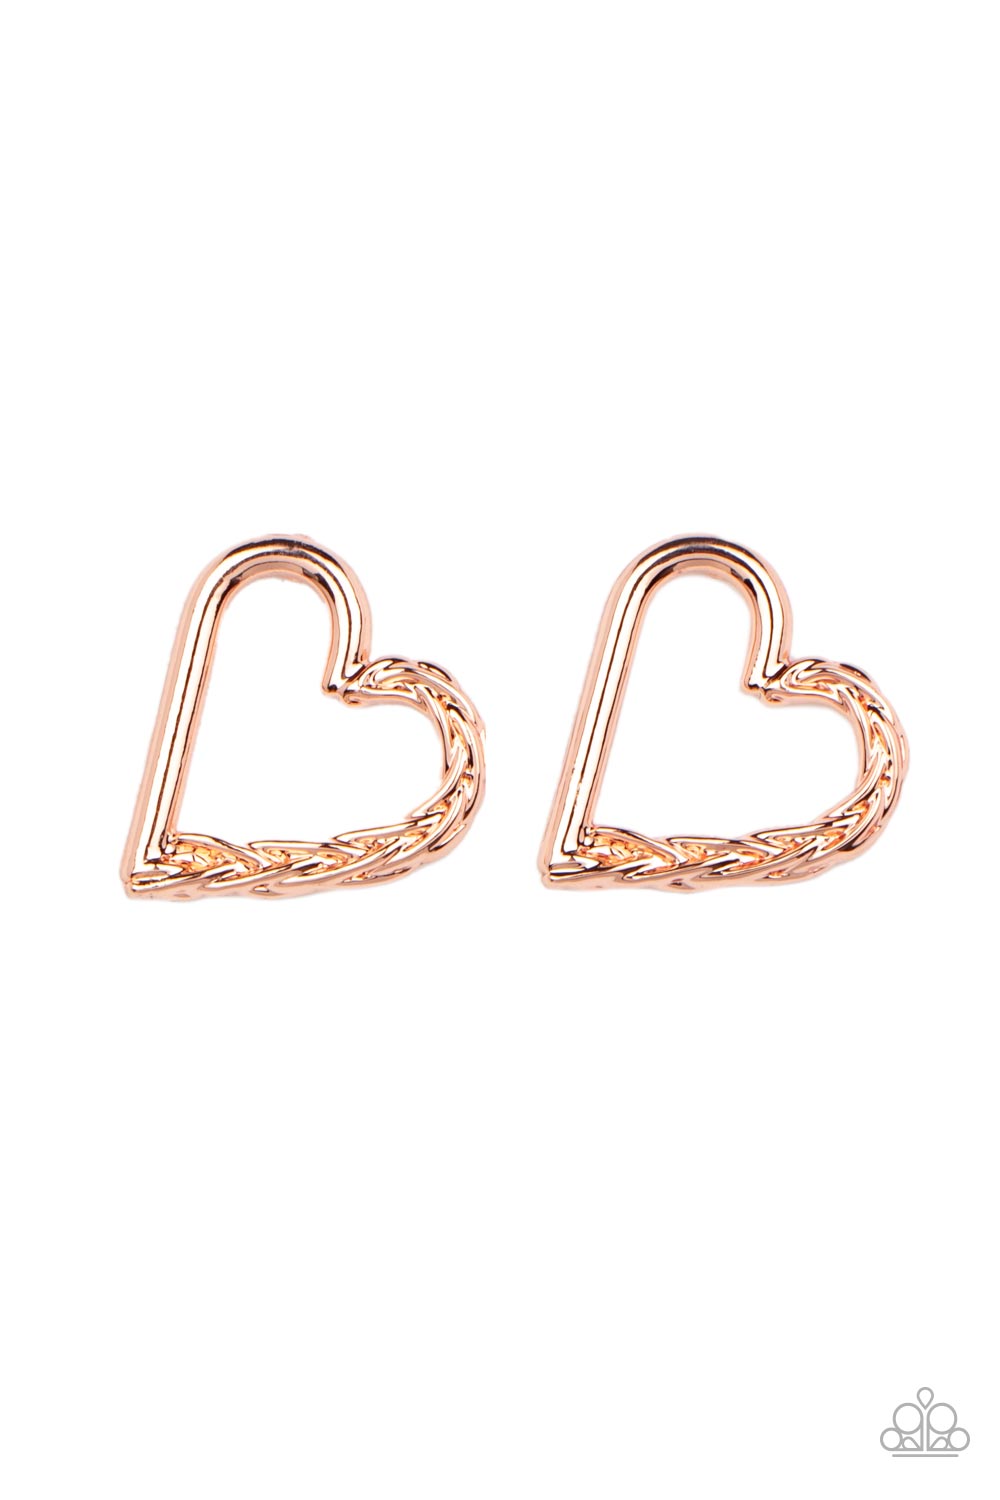 Cupid, Who? - Copper Earrings - Paparazzi Accessories